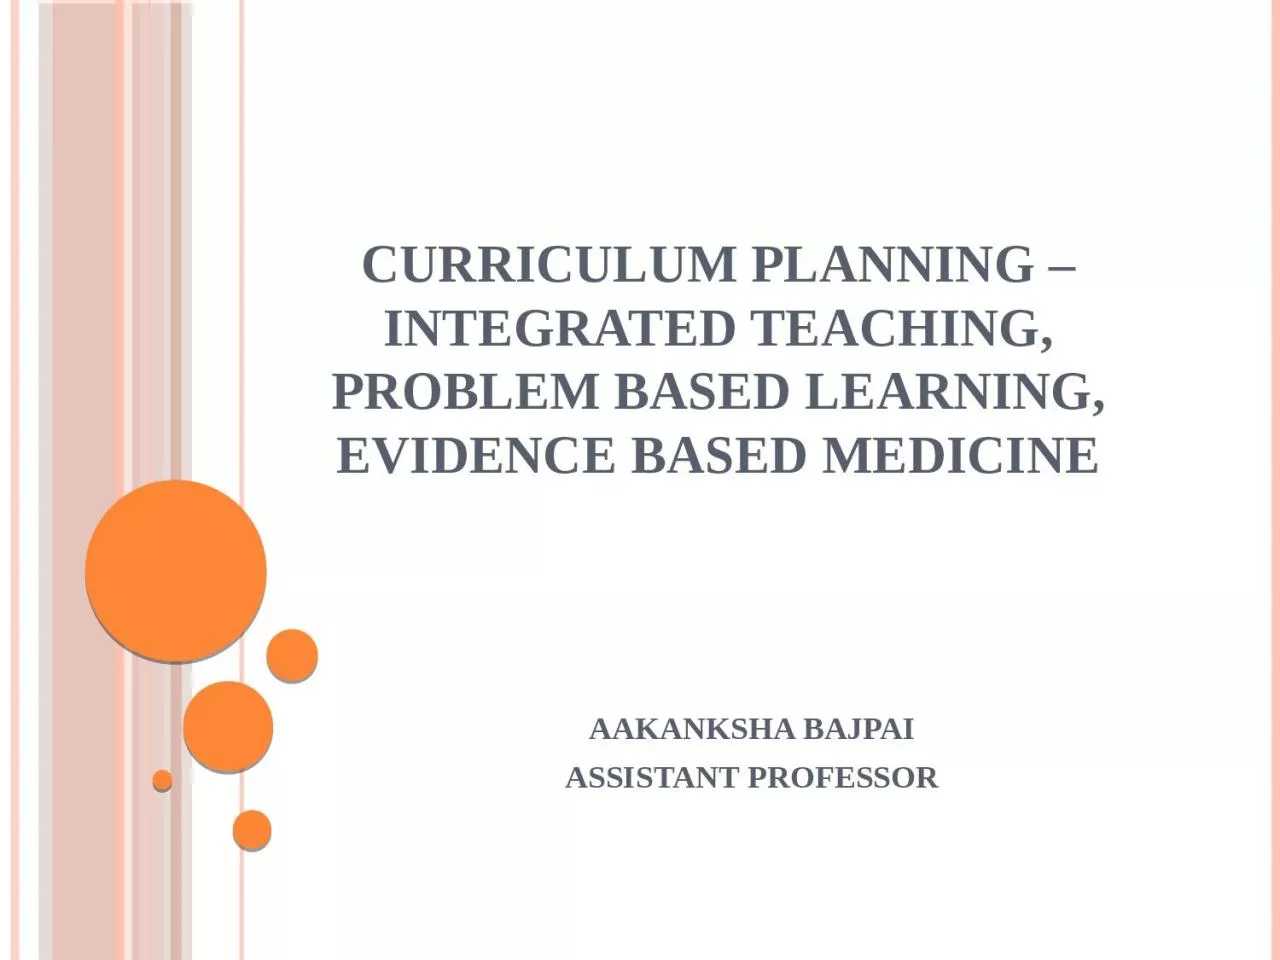 Curriculum planning – Integrated teaching, Problem based learning, Evidence based medicine